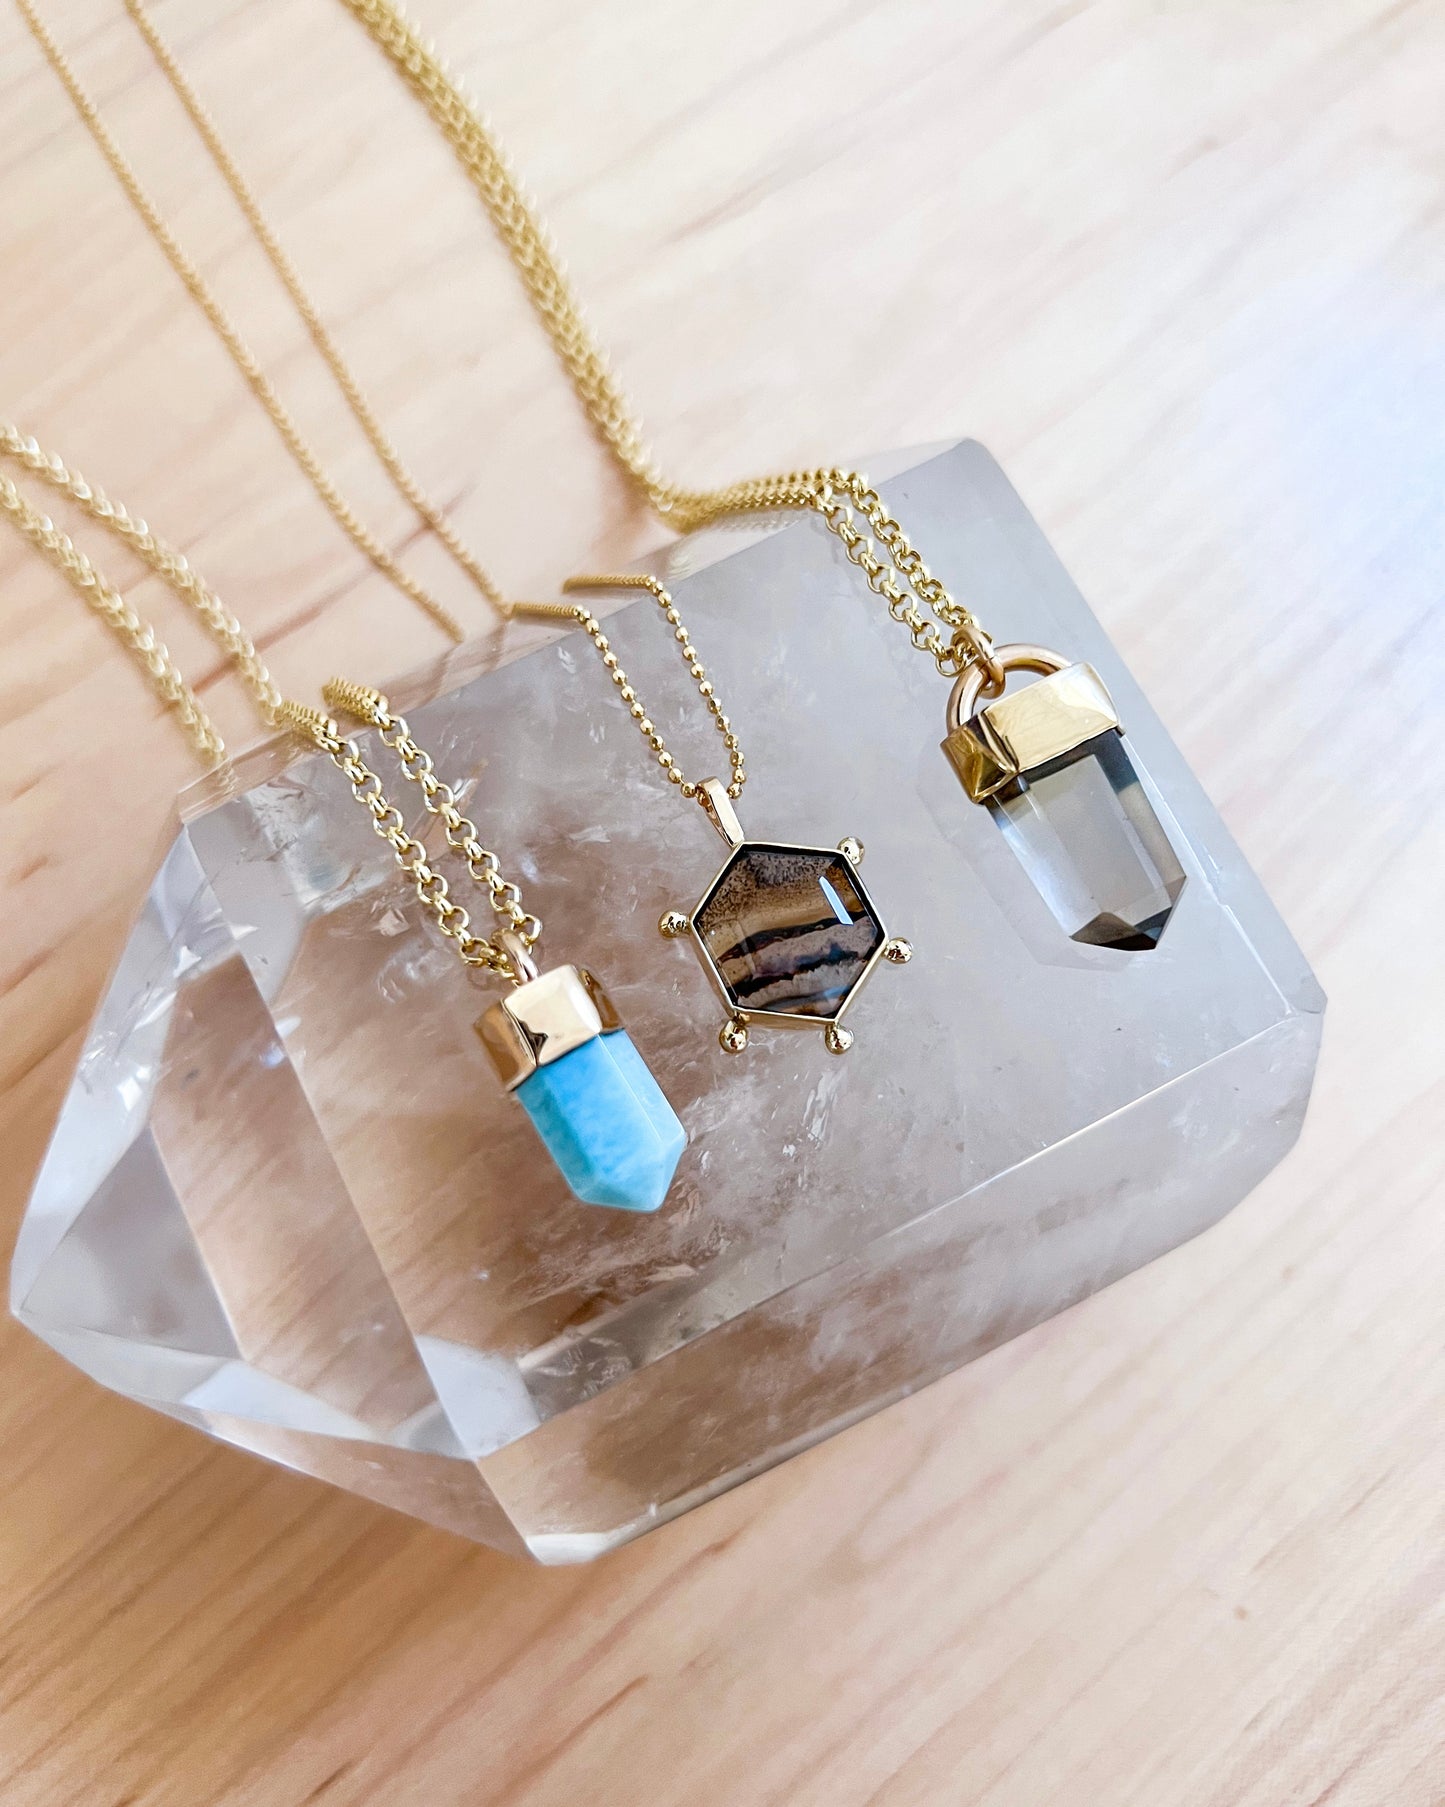 25% OFF Cosmos Montana Agate Necklace in 18k and 14k gold